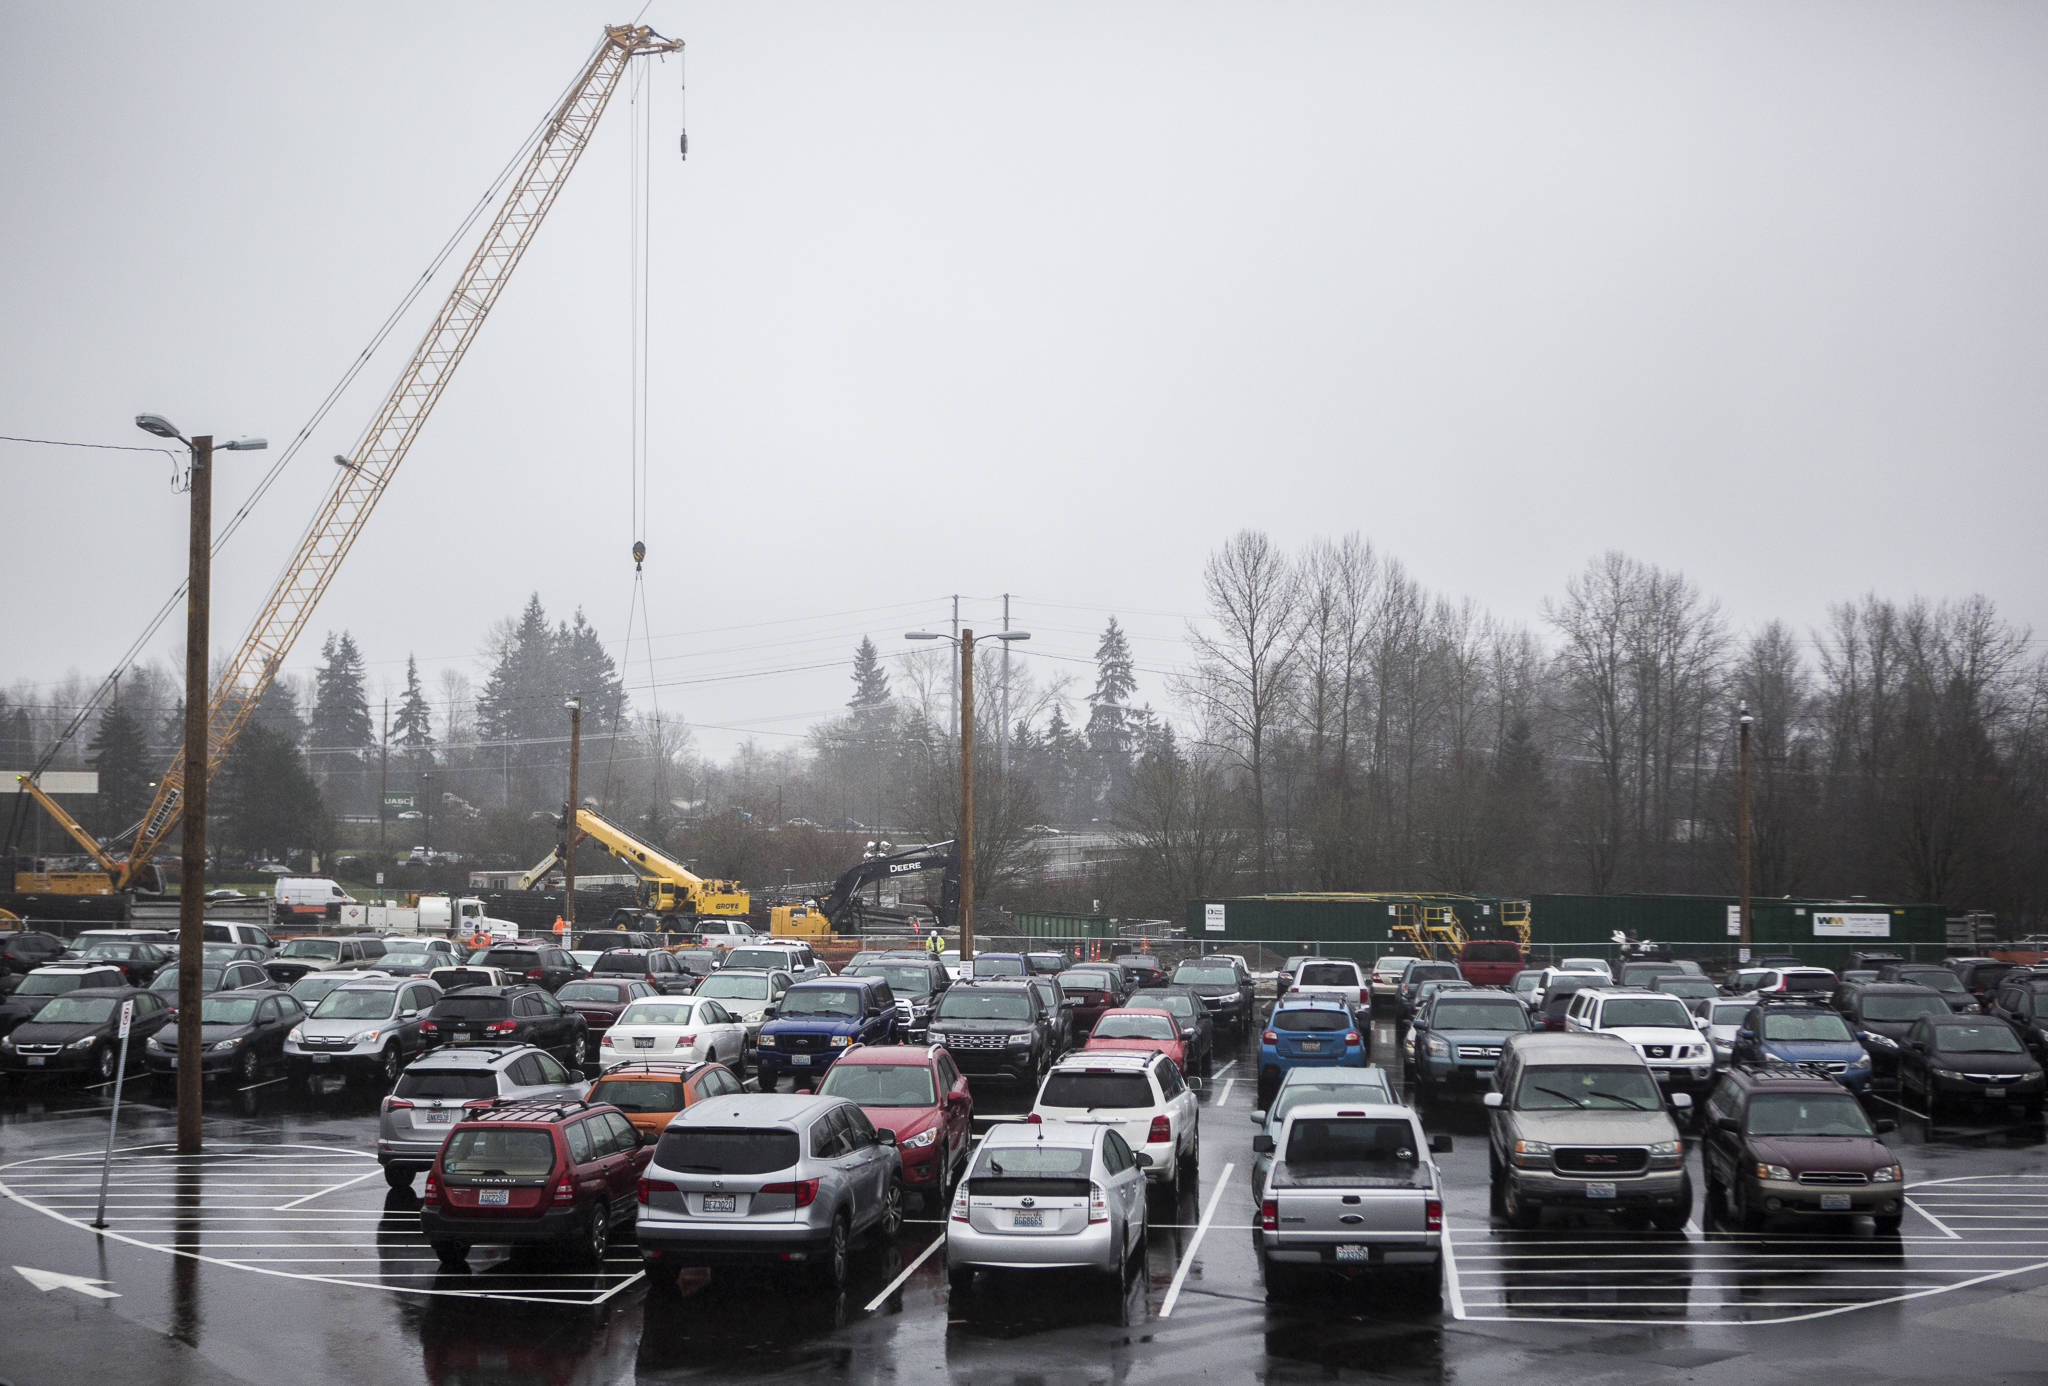 Construction continues behind a full Lynnwood Transit Center parking lot Wednesday in Lynnwood. Parking spaces will shift throughout the year to make room for work on the light rail station. (Olivia Vanni / The Herald)